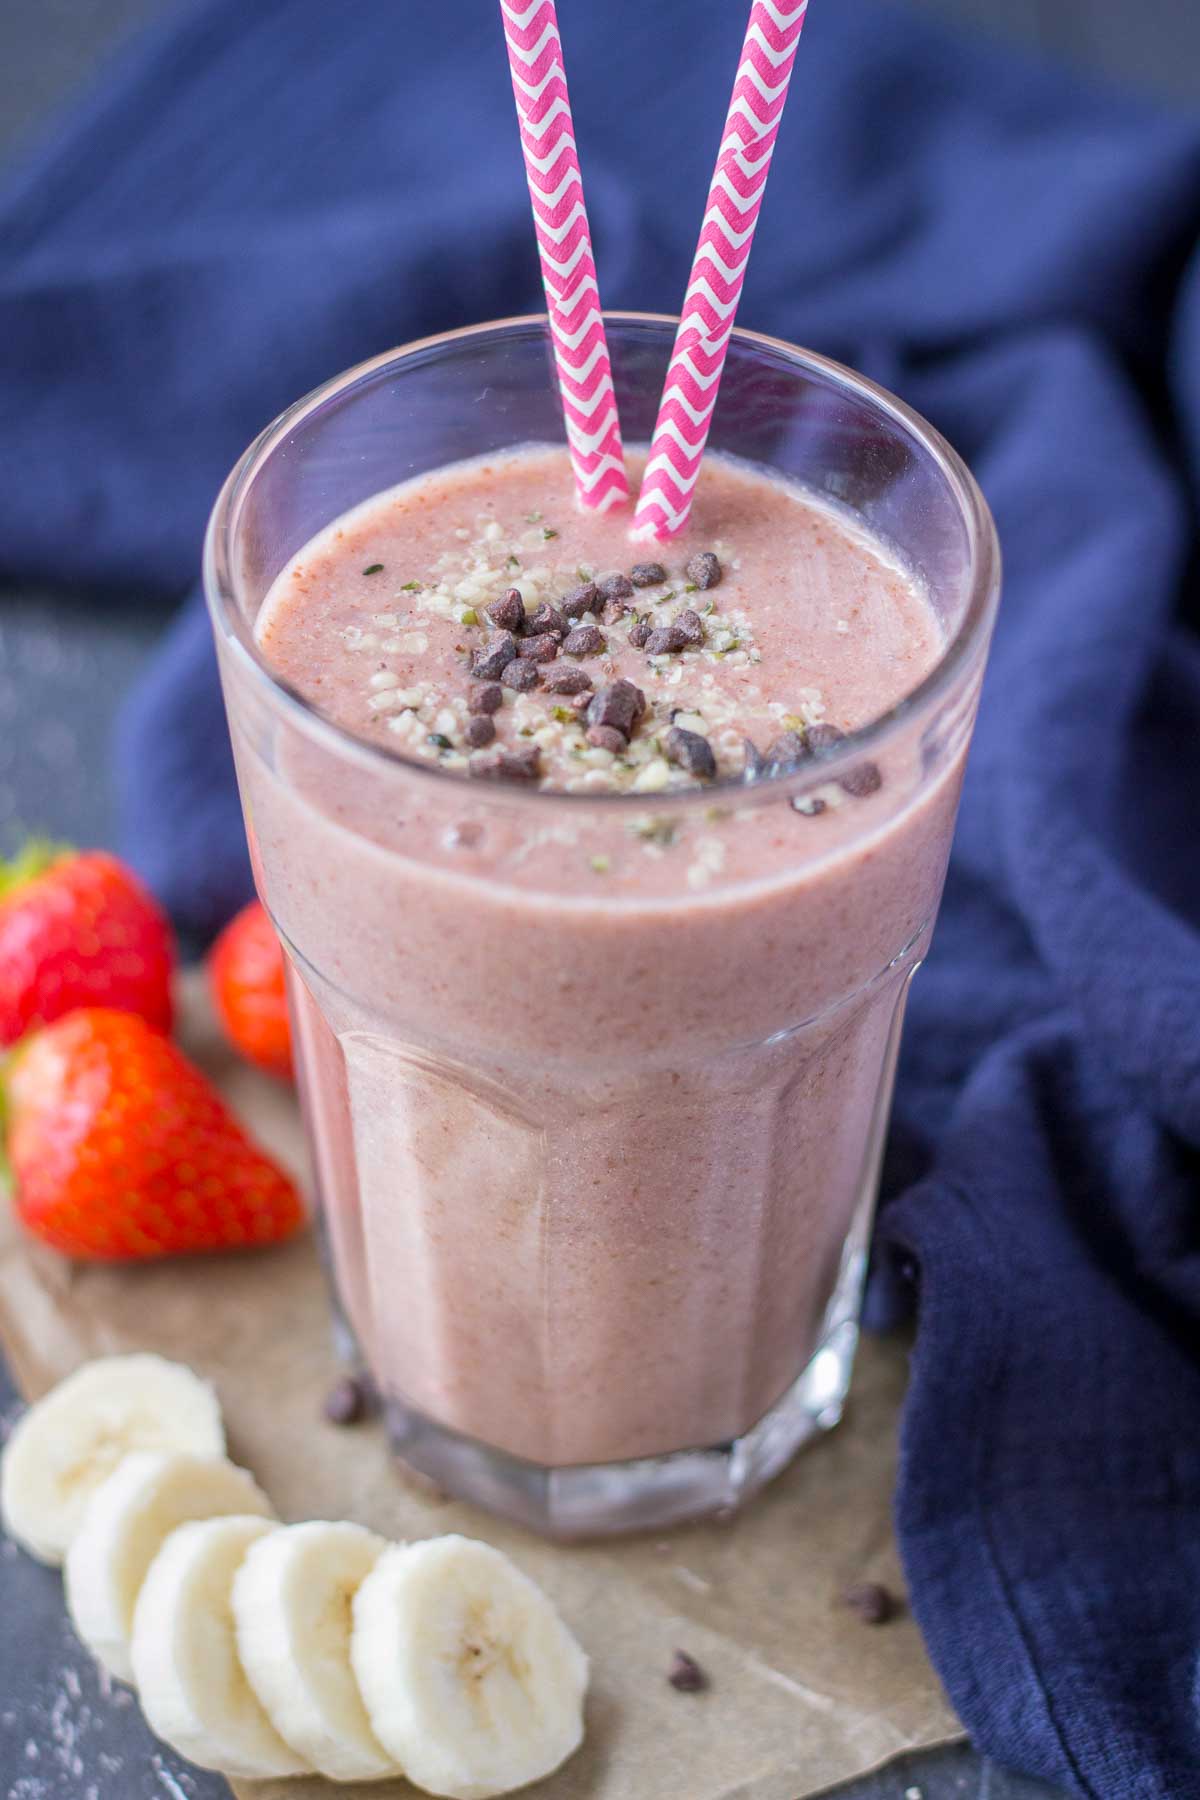 Strawberry Banana Smoothie served in a glass toped with banana slices and chocolate